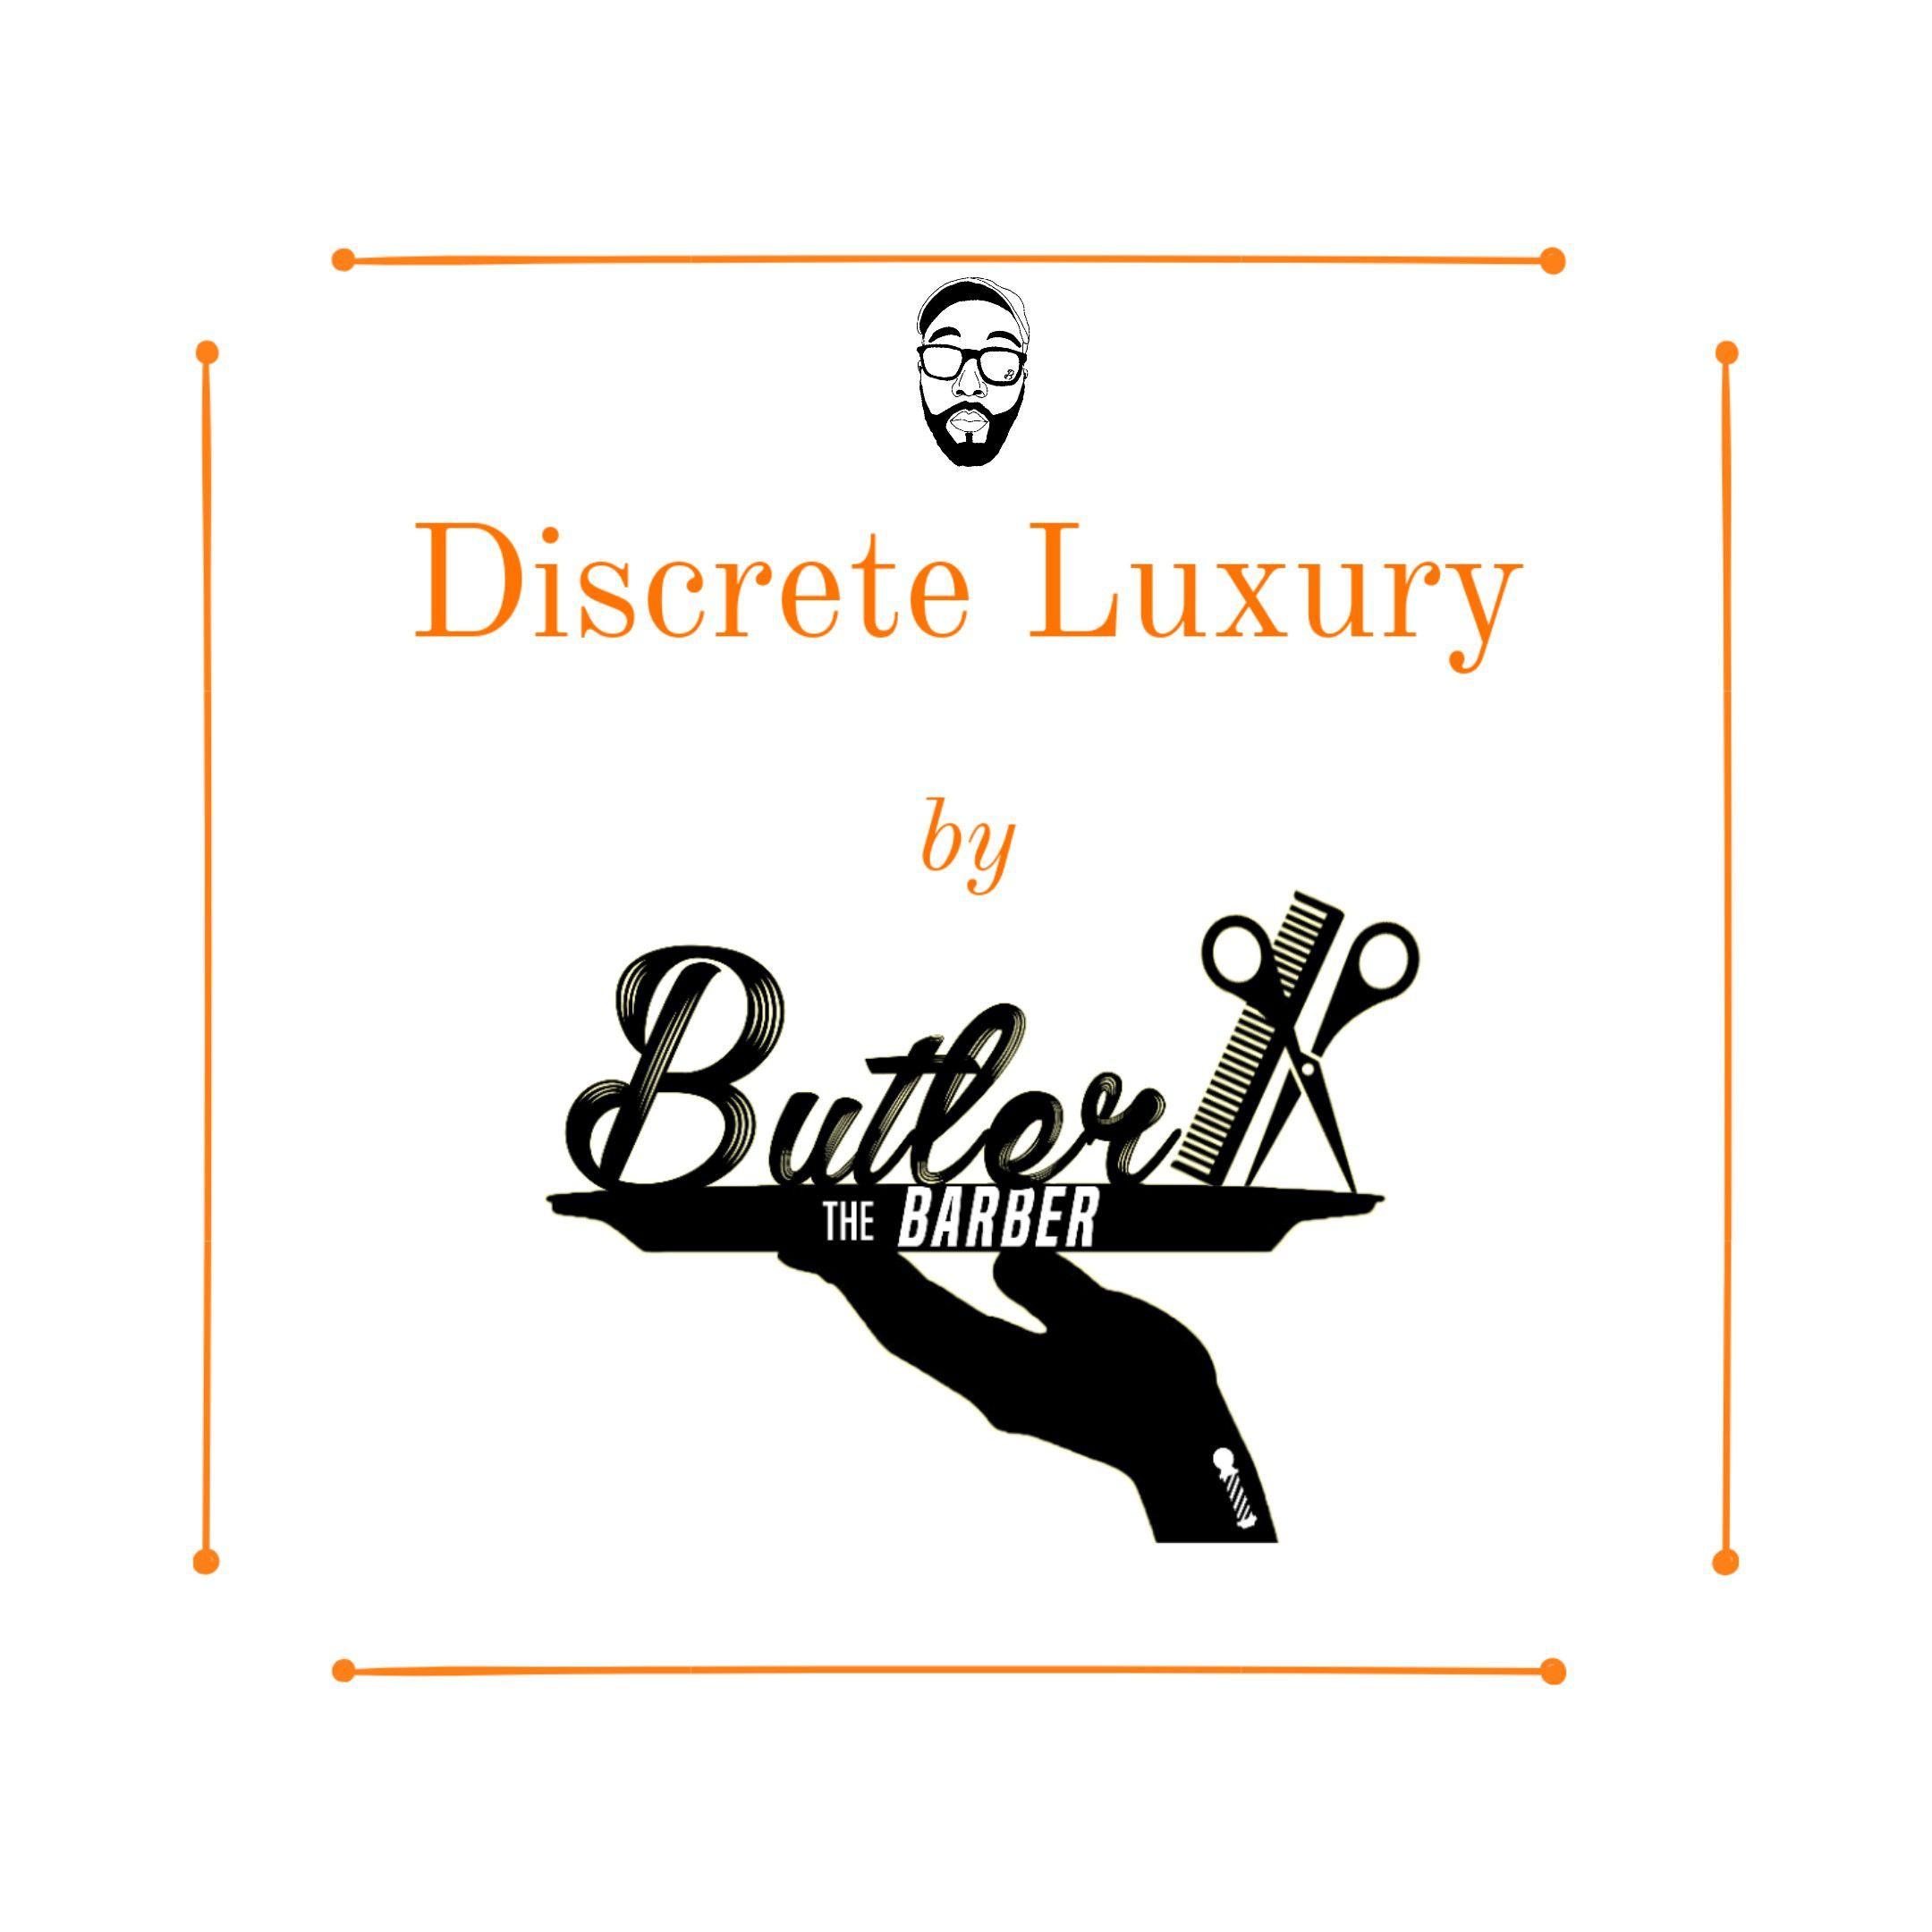 Discrete Luxury by Butler the Barber, 5020 Long Iron Drive, Indianapolis, 46235